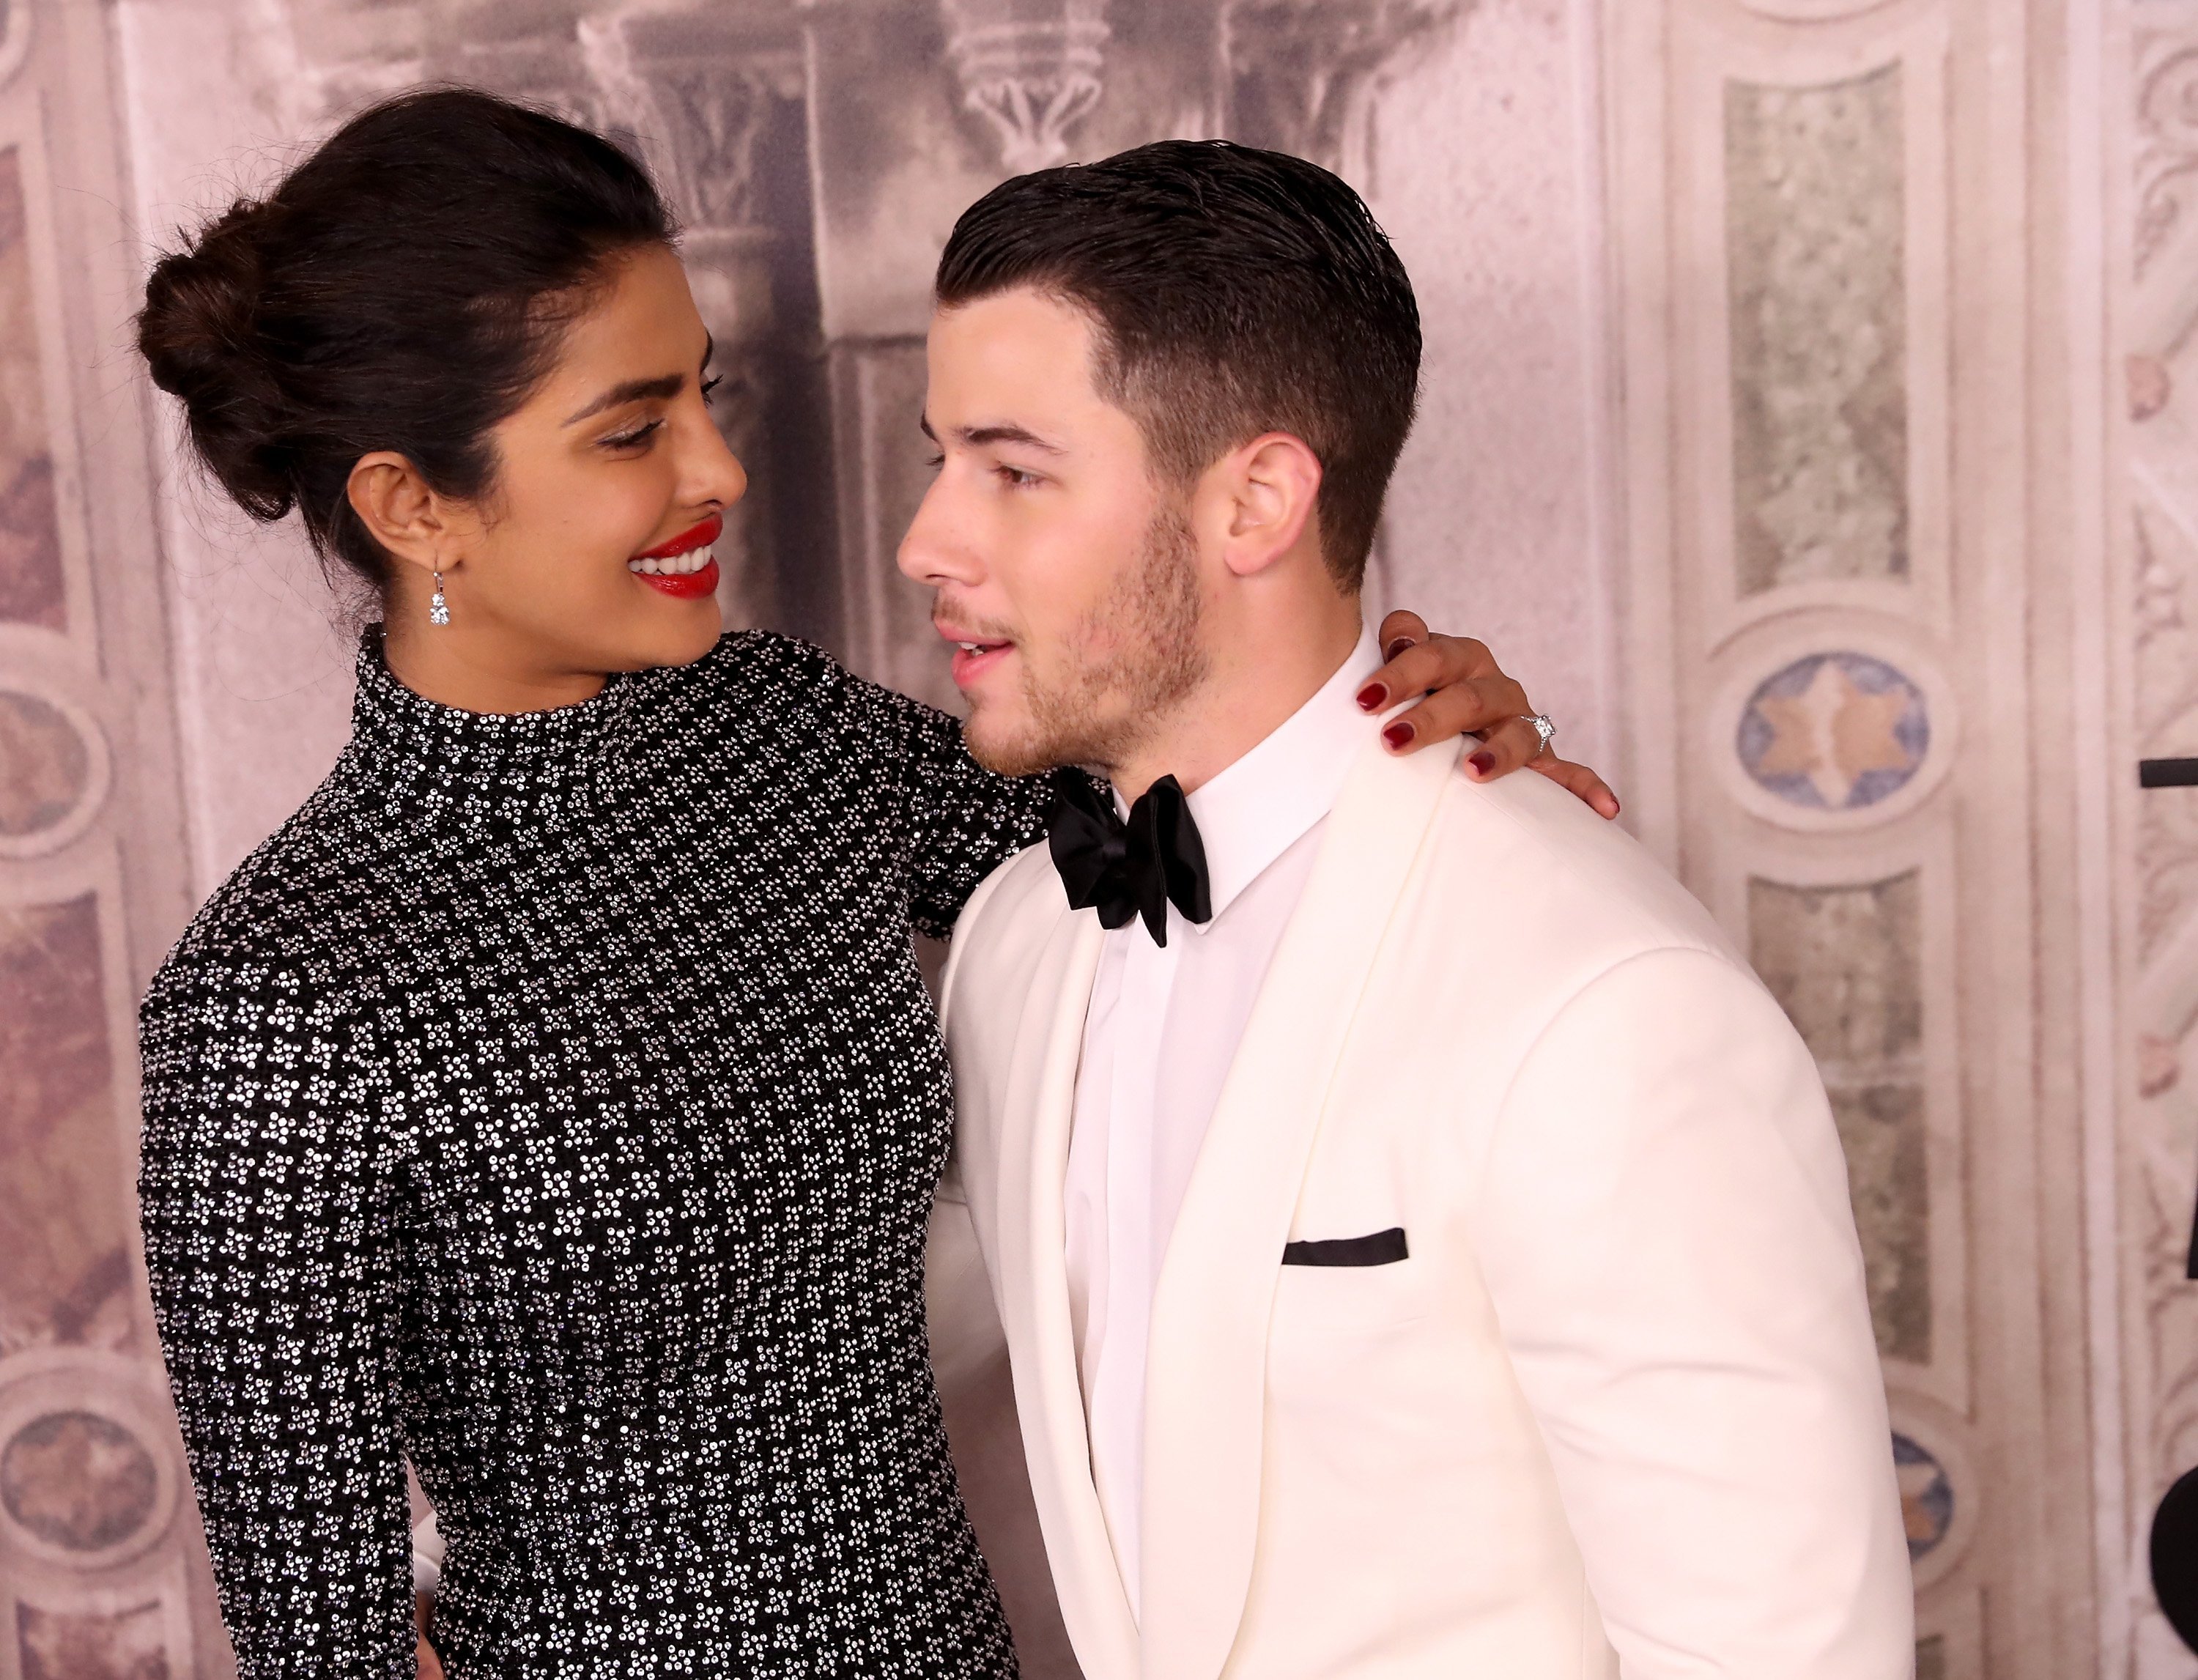 Priyanka Chopra and Nick Jonas attend the Ralph Lauren fashion show during New York Fashion Week in New York City on September 7, 2018 | Photo: Getty Images